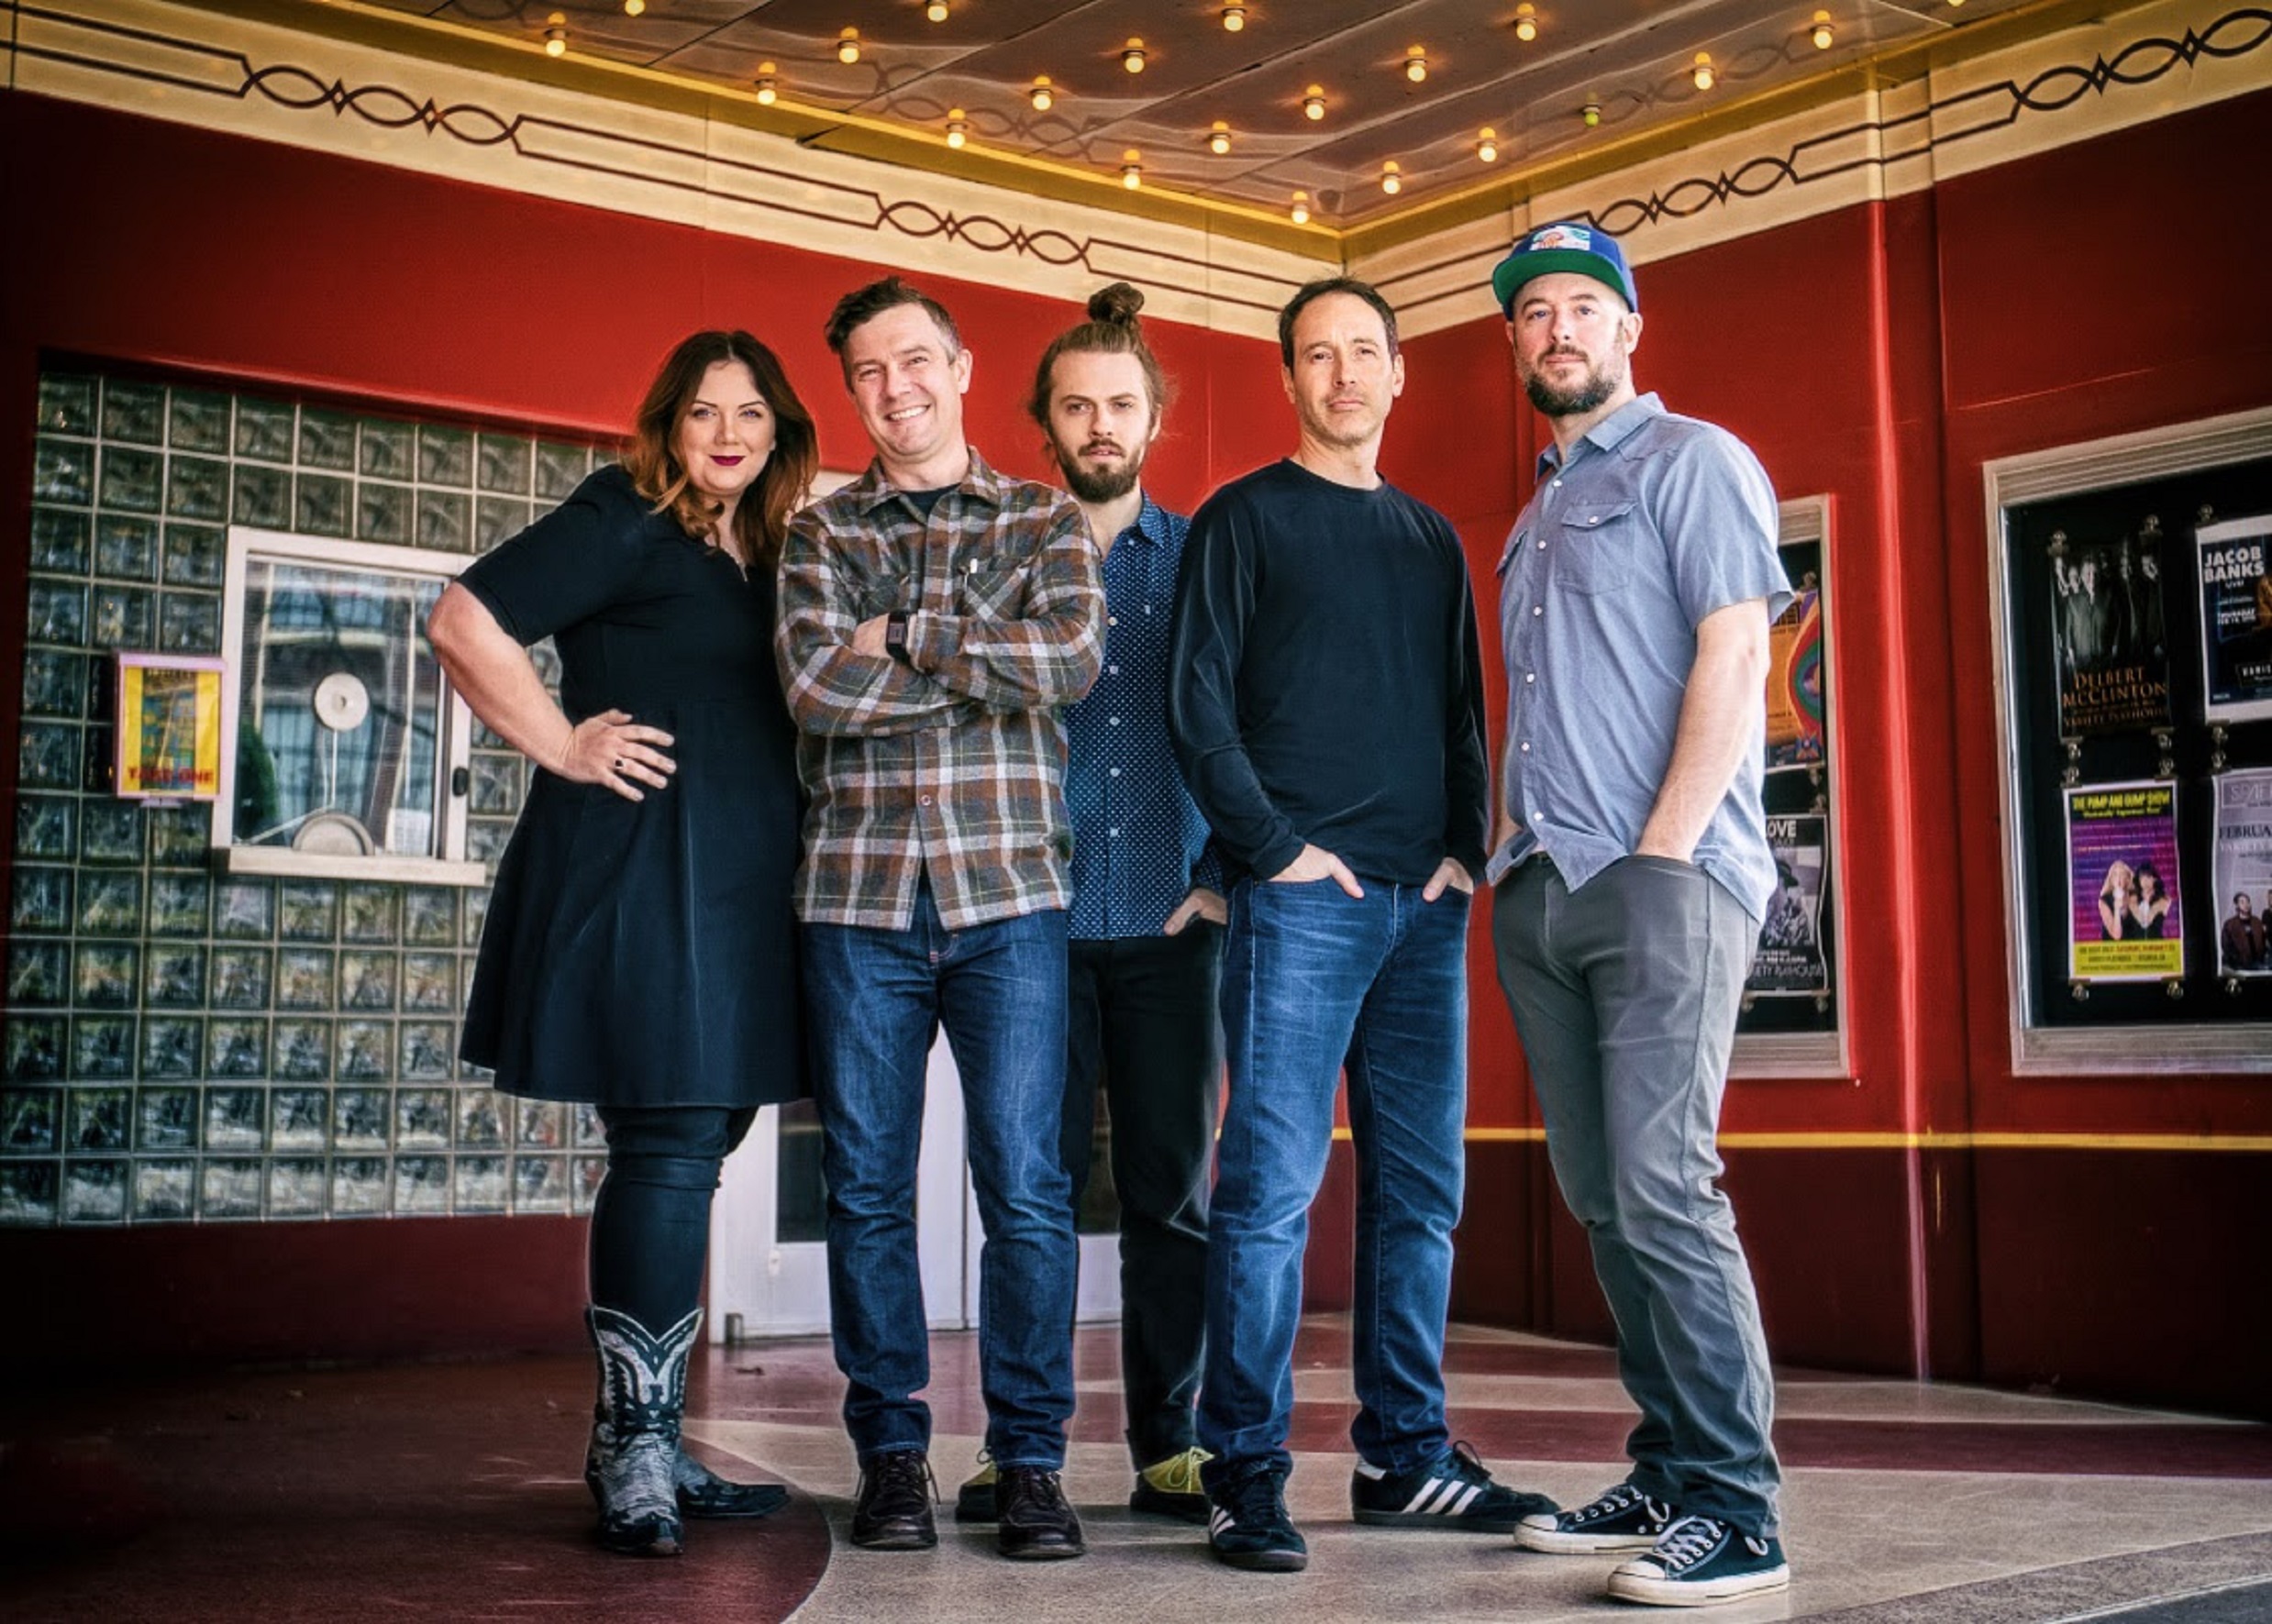 Longmont Oktoberfest Returns Sept. 20-21 Featuring Two Nights of Yonder Mountain String Band